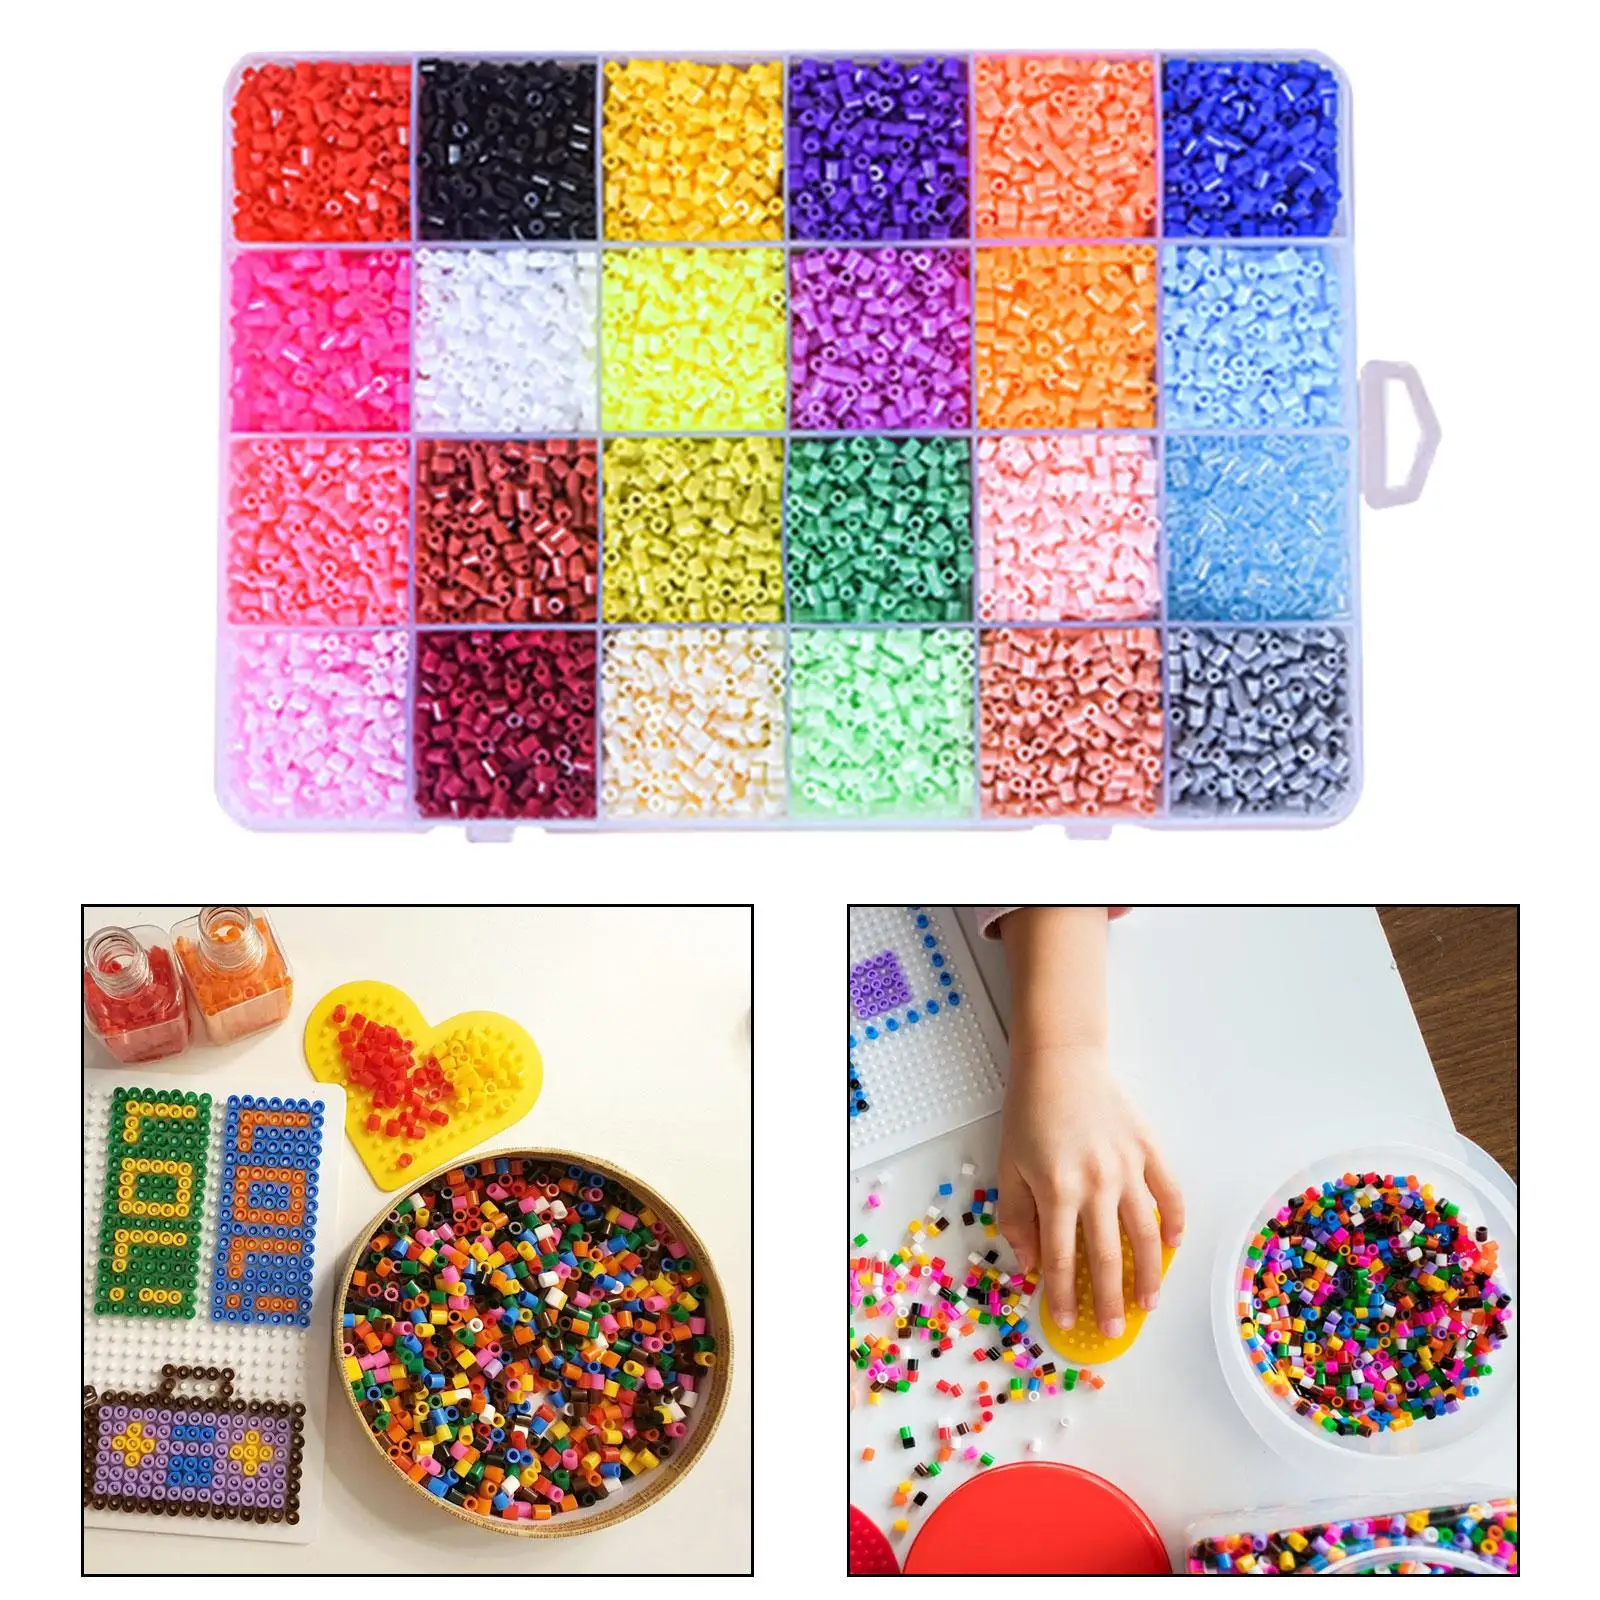 

39000Pcs Fuse Beads Kit Creative 72 Colors DIY Art Melty Beads Hama Beads Puzzle Toys for Kids Children Party Christmas Girls